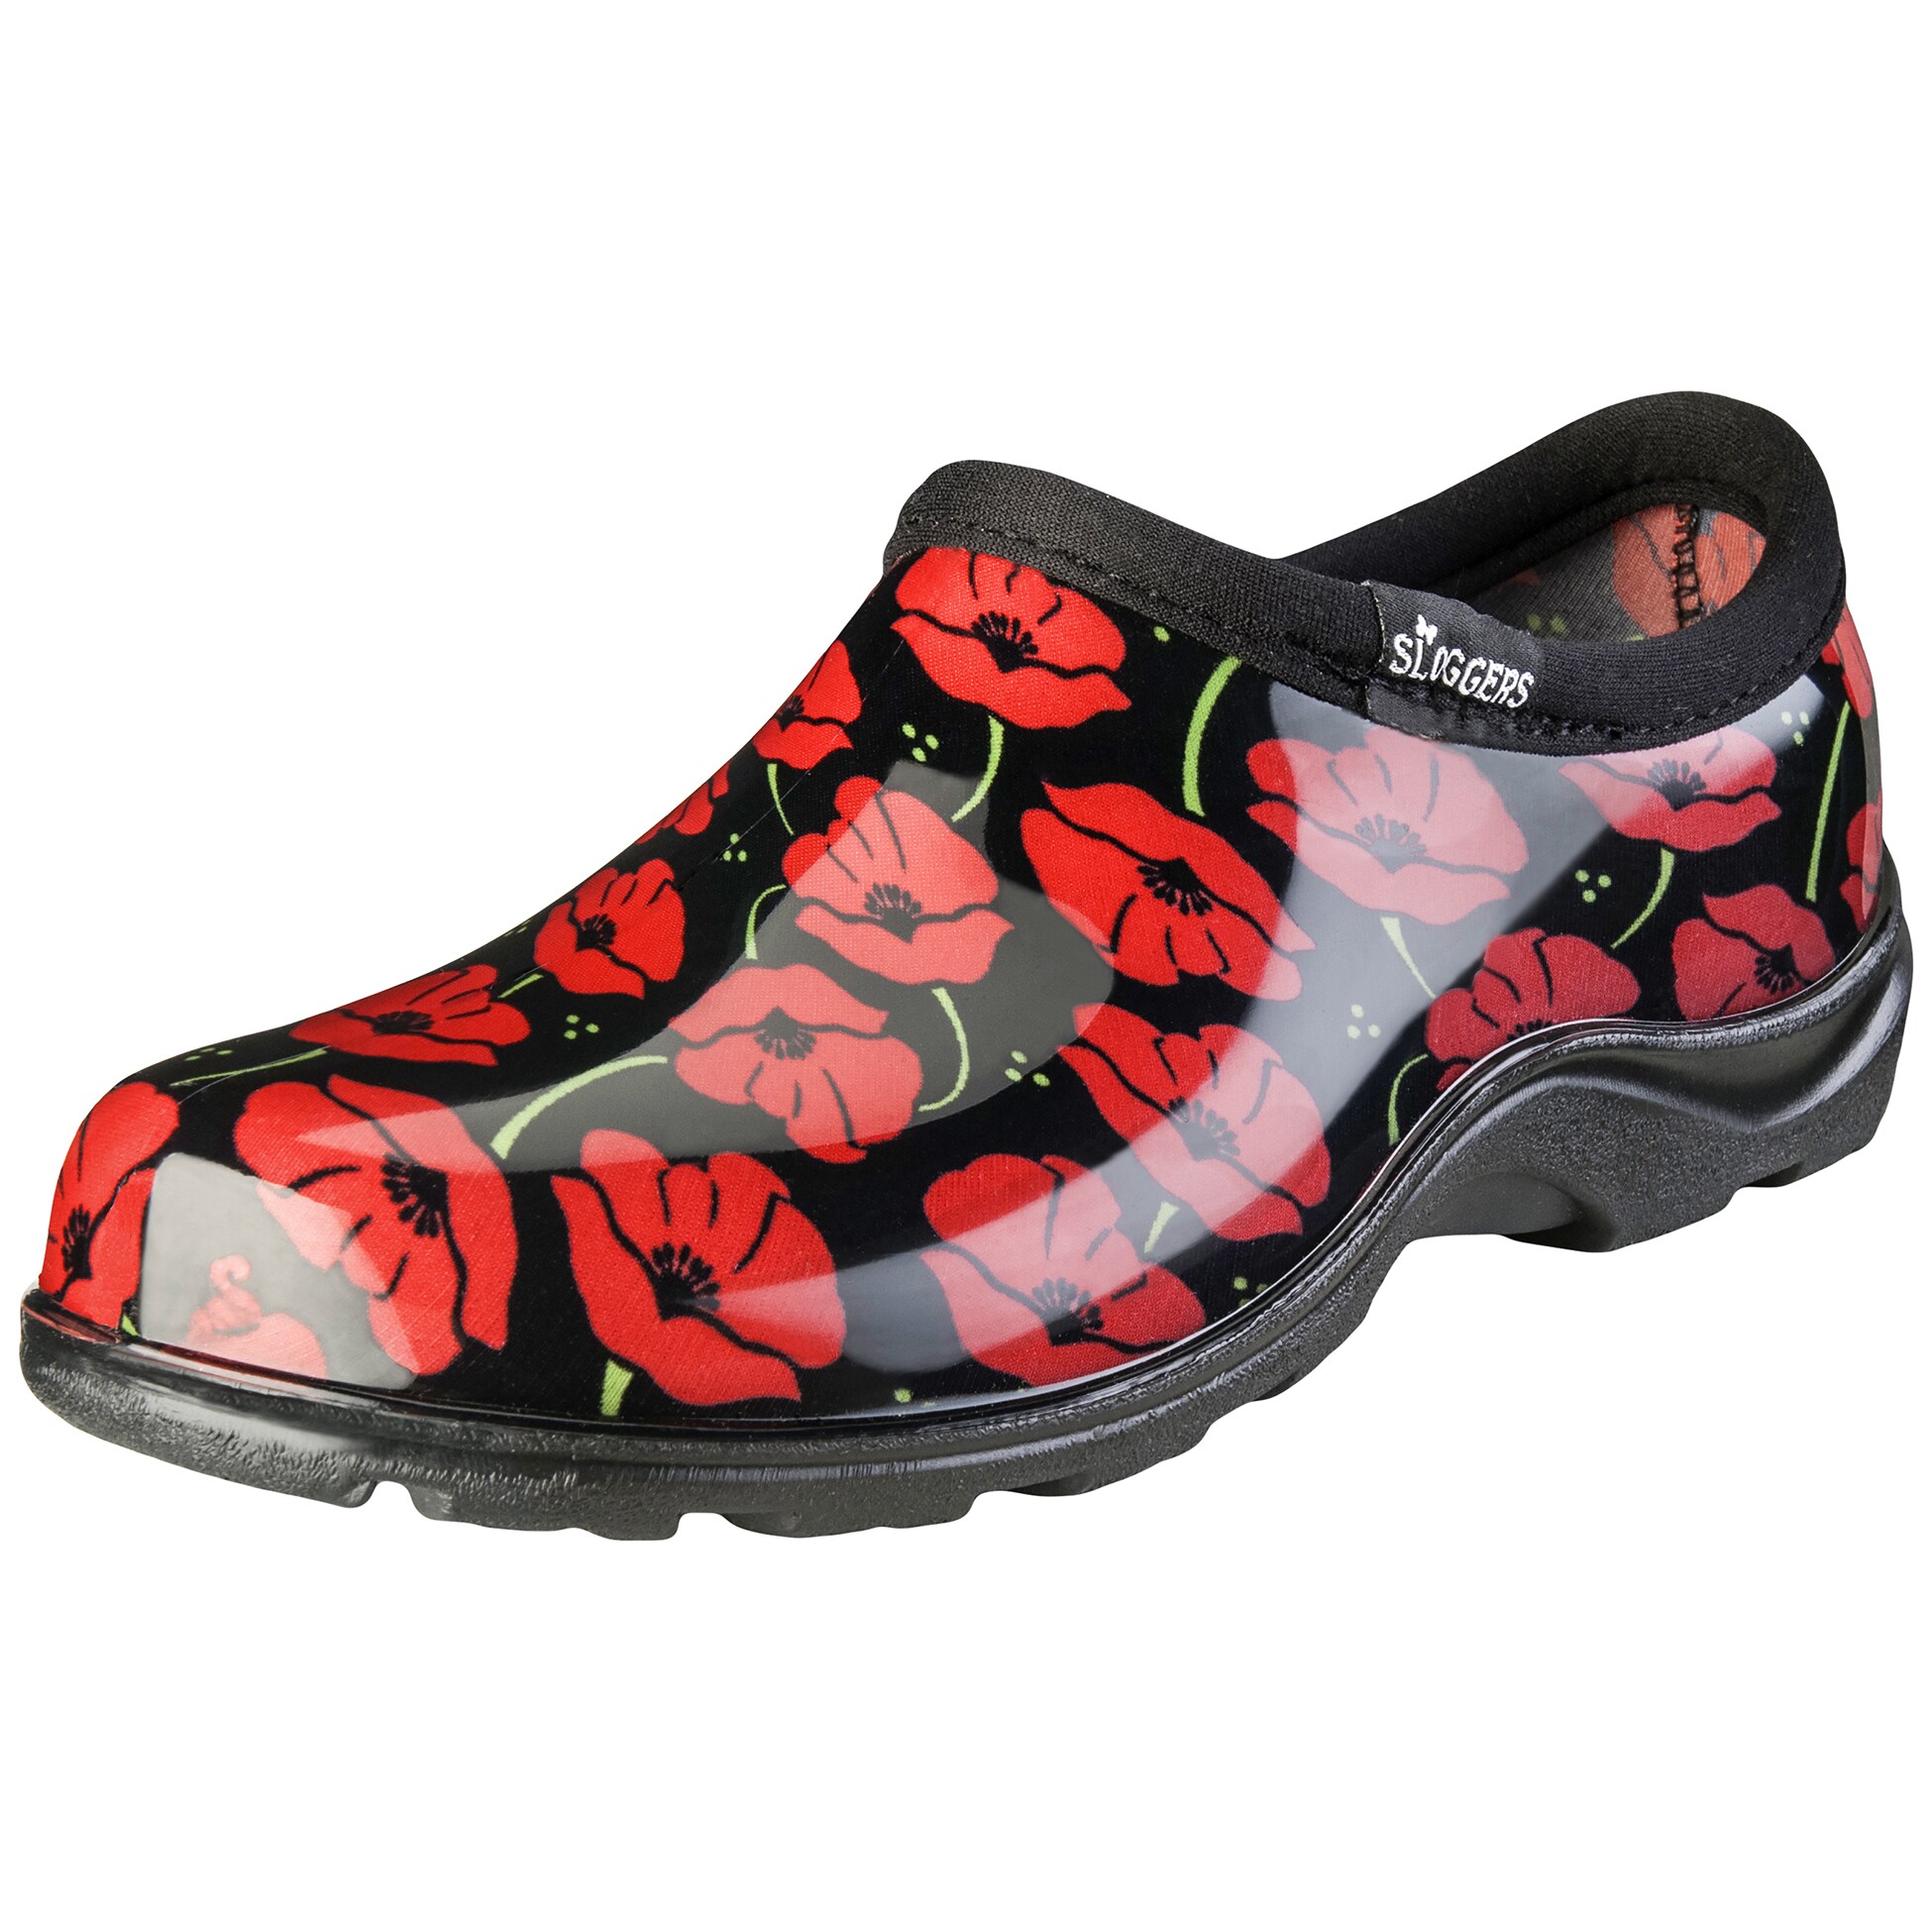 sloggers rain and garden shoes